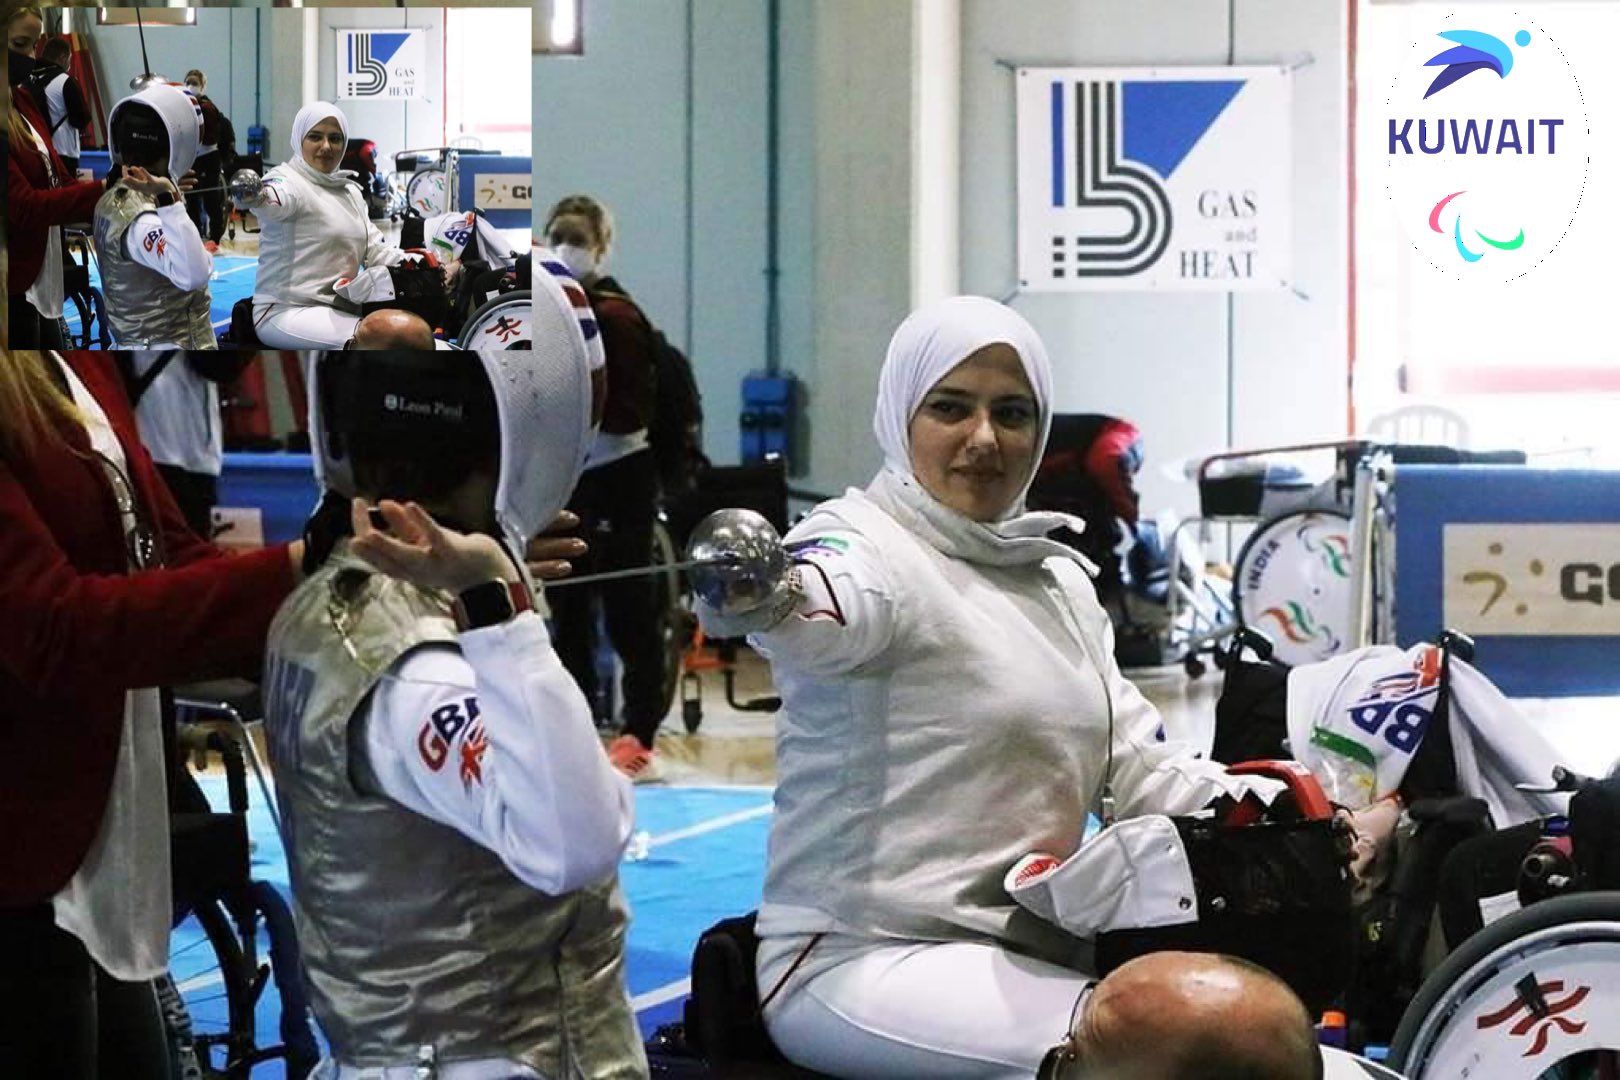 Kuwaiti fencer withdraws from match over Israeli opponent